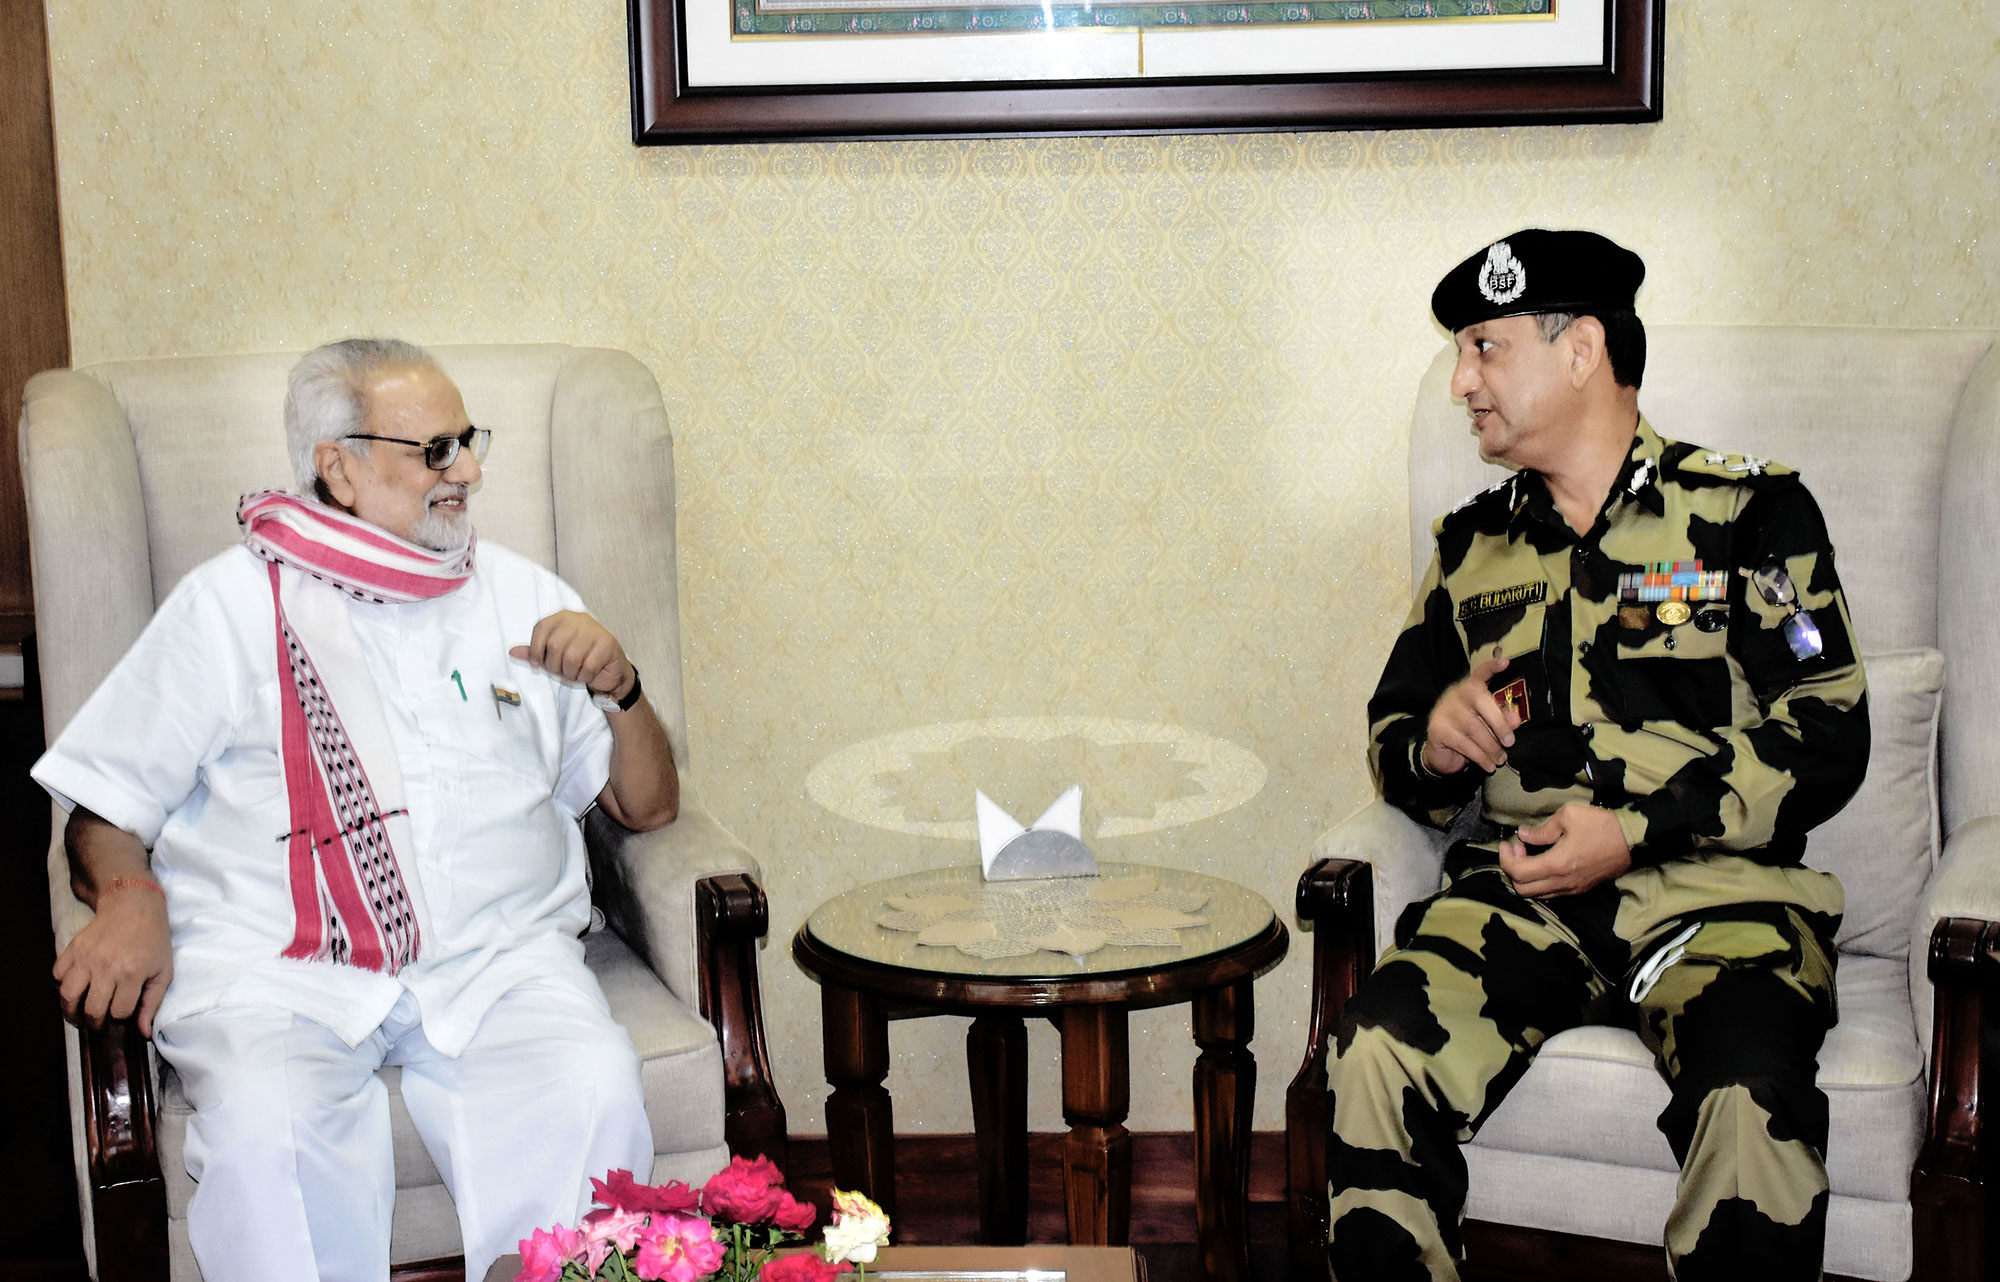 Sh. Satish Chandra Budakoti,  Inspector General, Frontier Headquarters ( Spl.Ops) Odisha, Border Security Force called on Hon'ble Governor Prof Ganeshi Lal at Rajbhawan on 02.09.2021